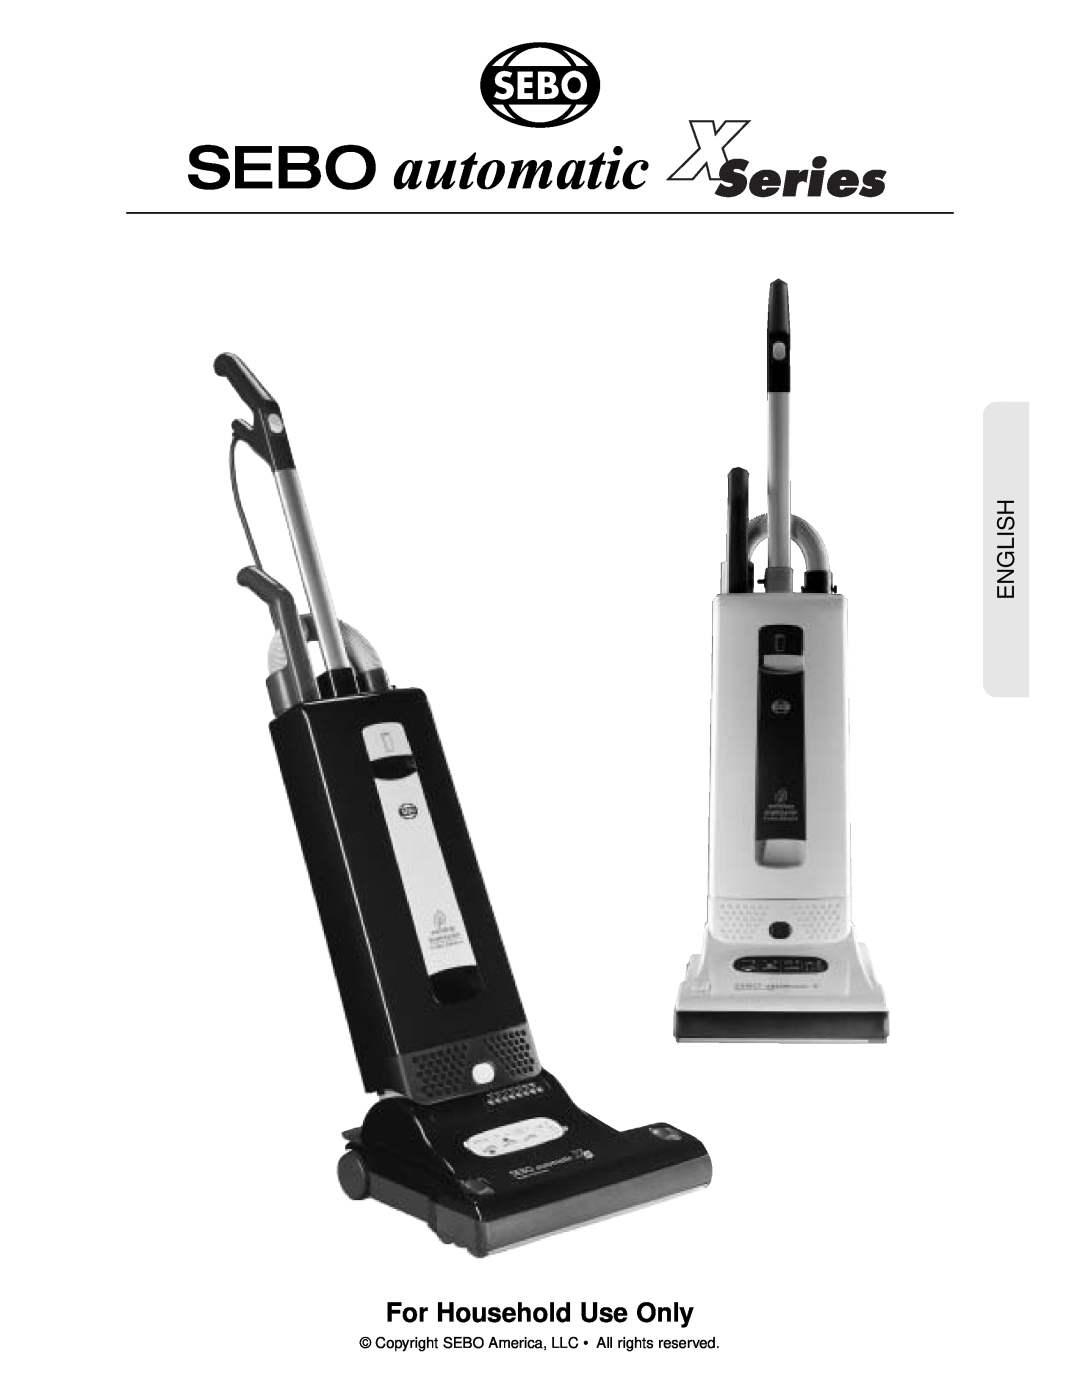 Sebo X4, X5 manual For Household Use Only, SEBO automatic Series, English 